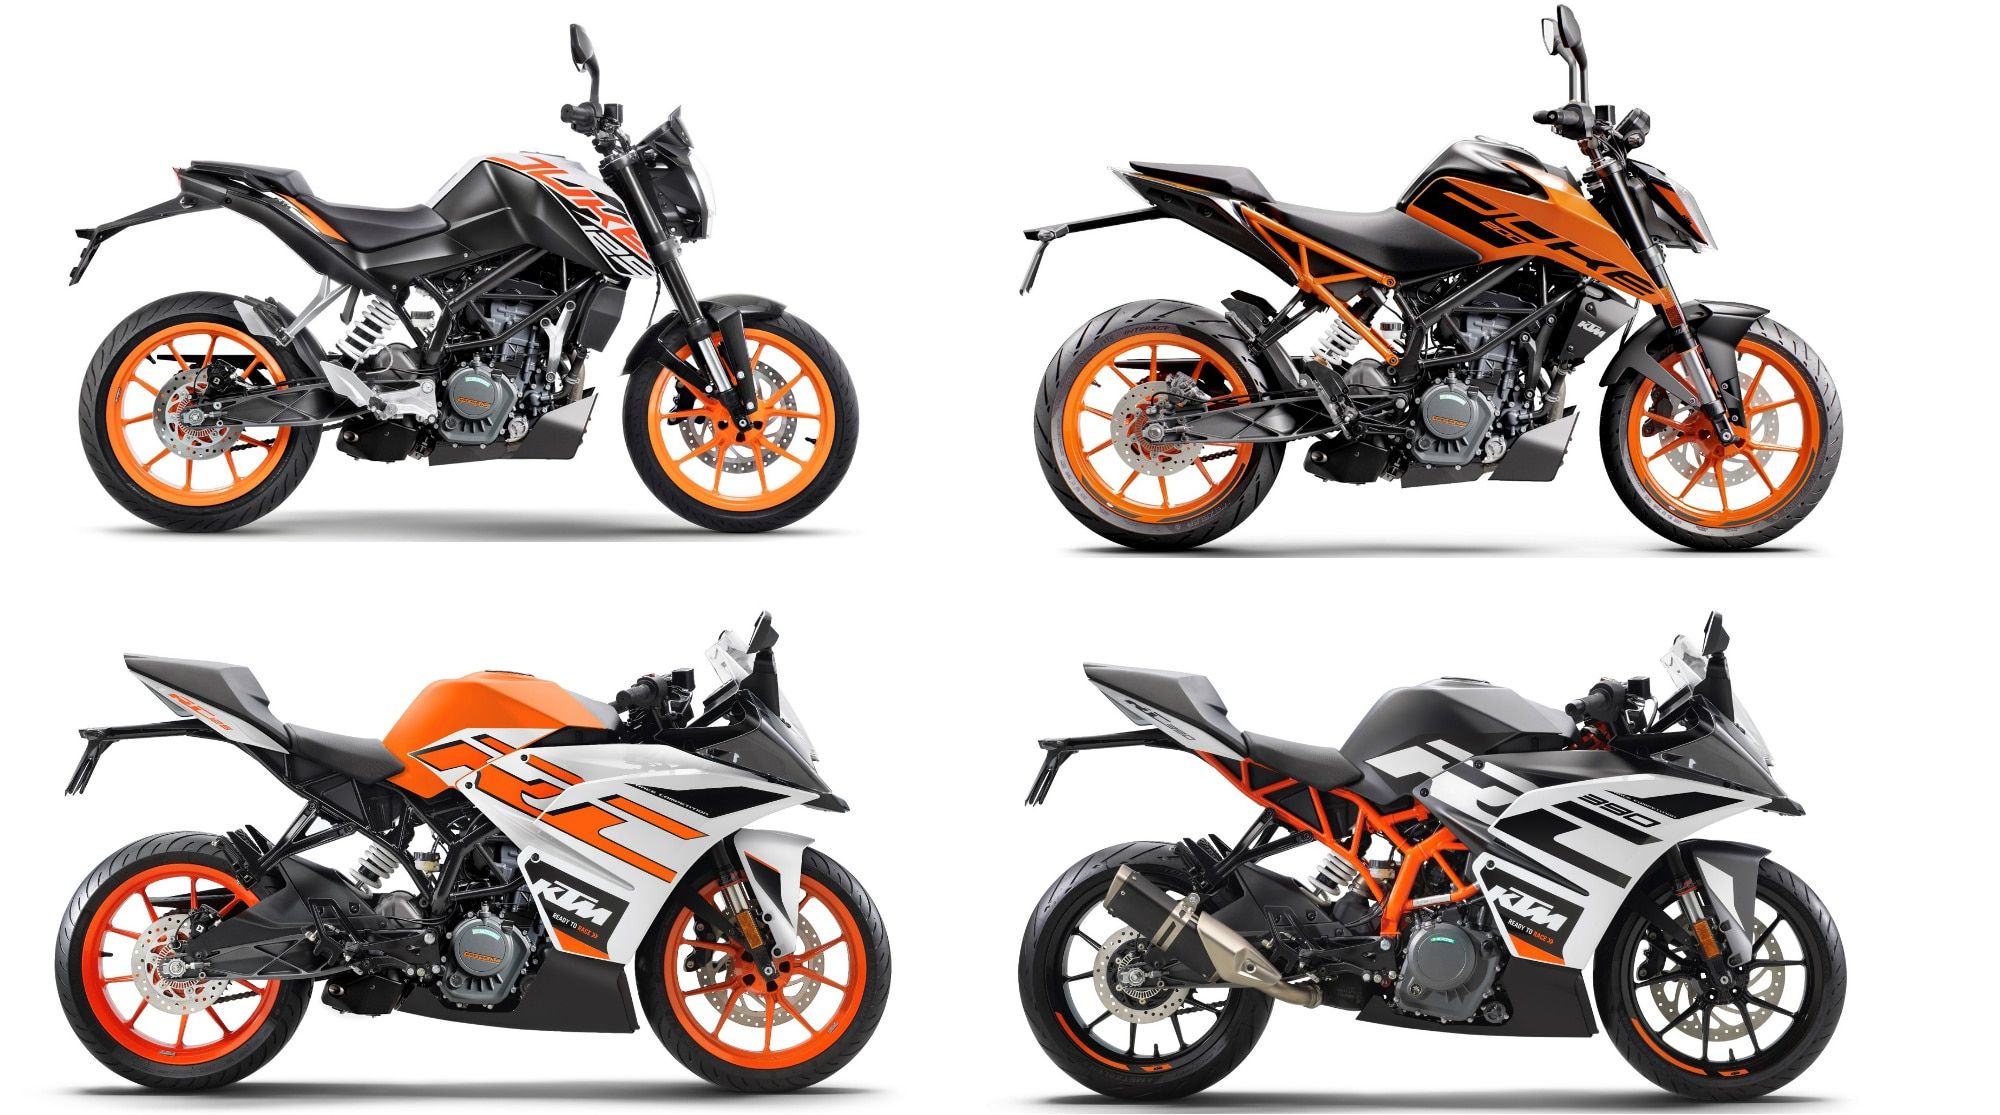 BS6 Compliant KTM 125 Duke, RC 390 Duke, RC390 And More Launched